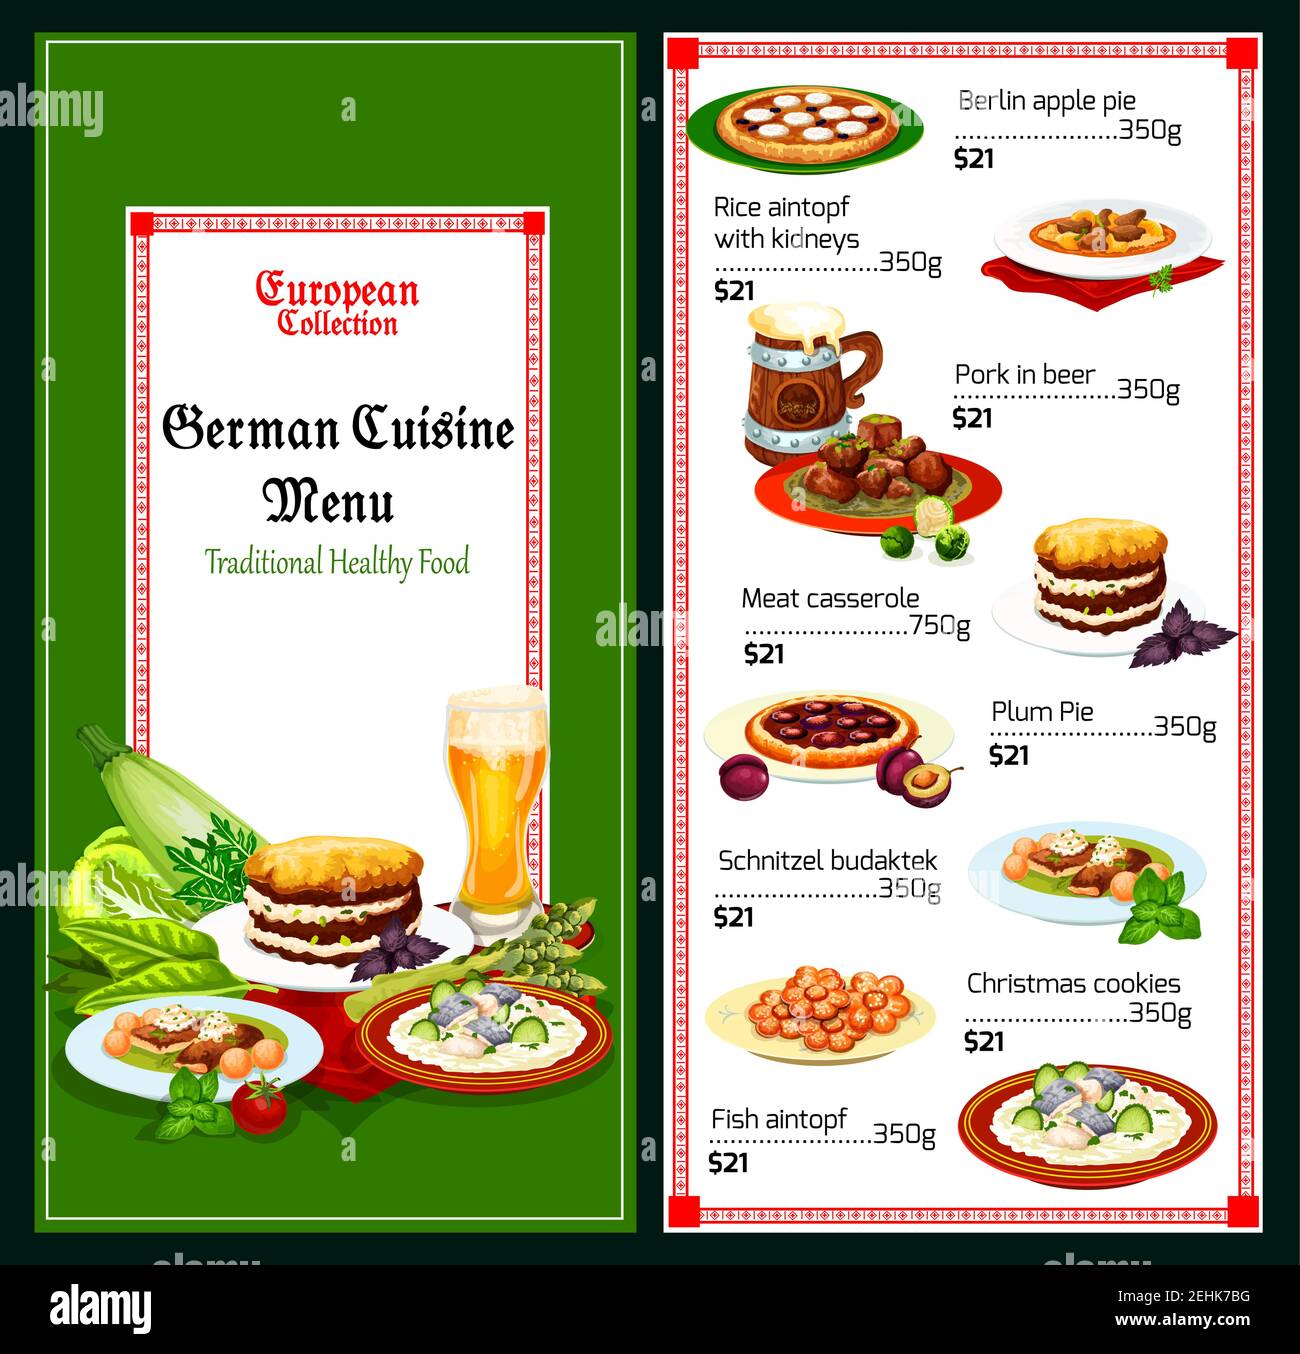 German restaurant menu with meat and fish dish of bavarian cuisine. Pork stewed in beer, beef casserole and schnitzel, rice with kidney, fish stew, fr Stock Vector